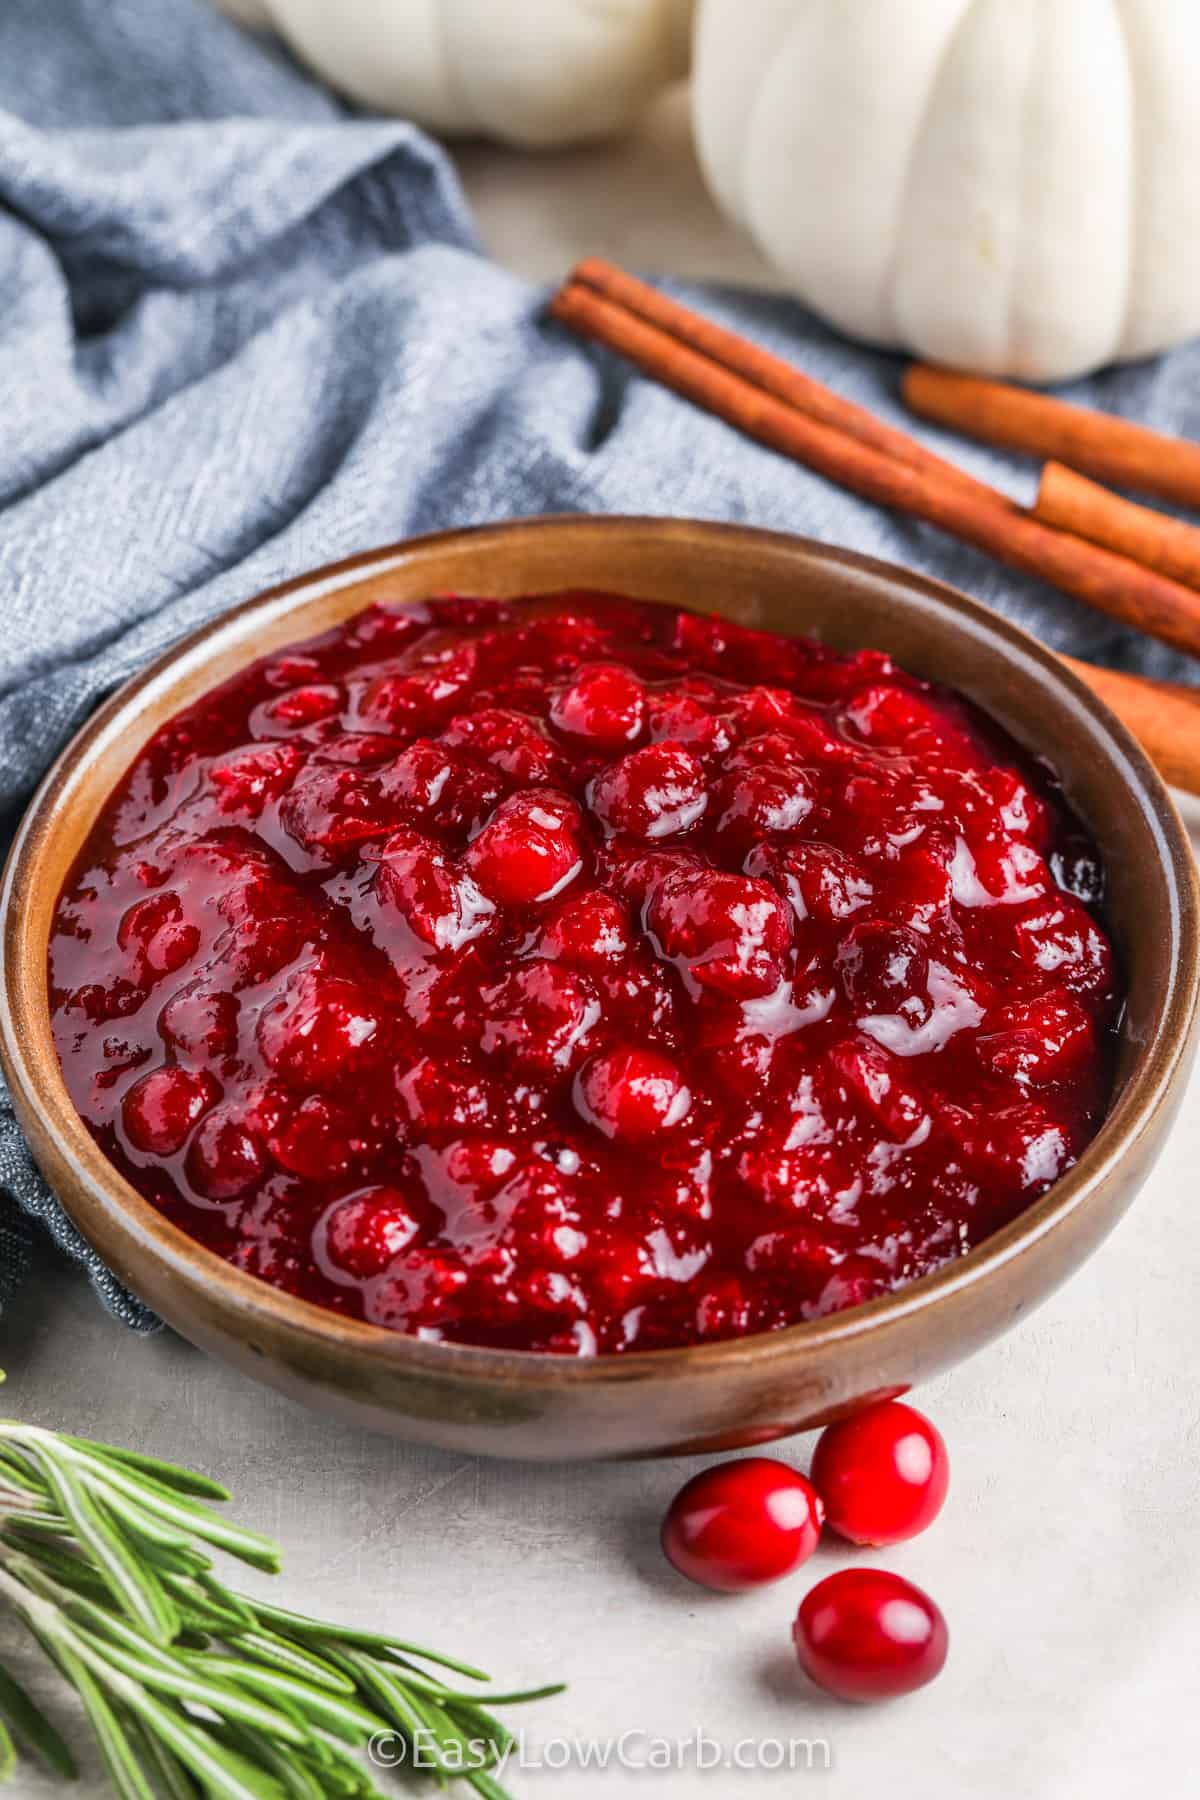 Keto Cranberry Sauce in a bowl with cranberries, rosemary and cinnamon sticks on the side